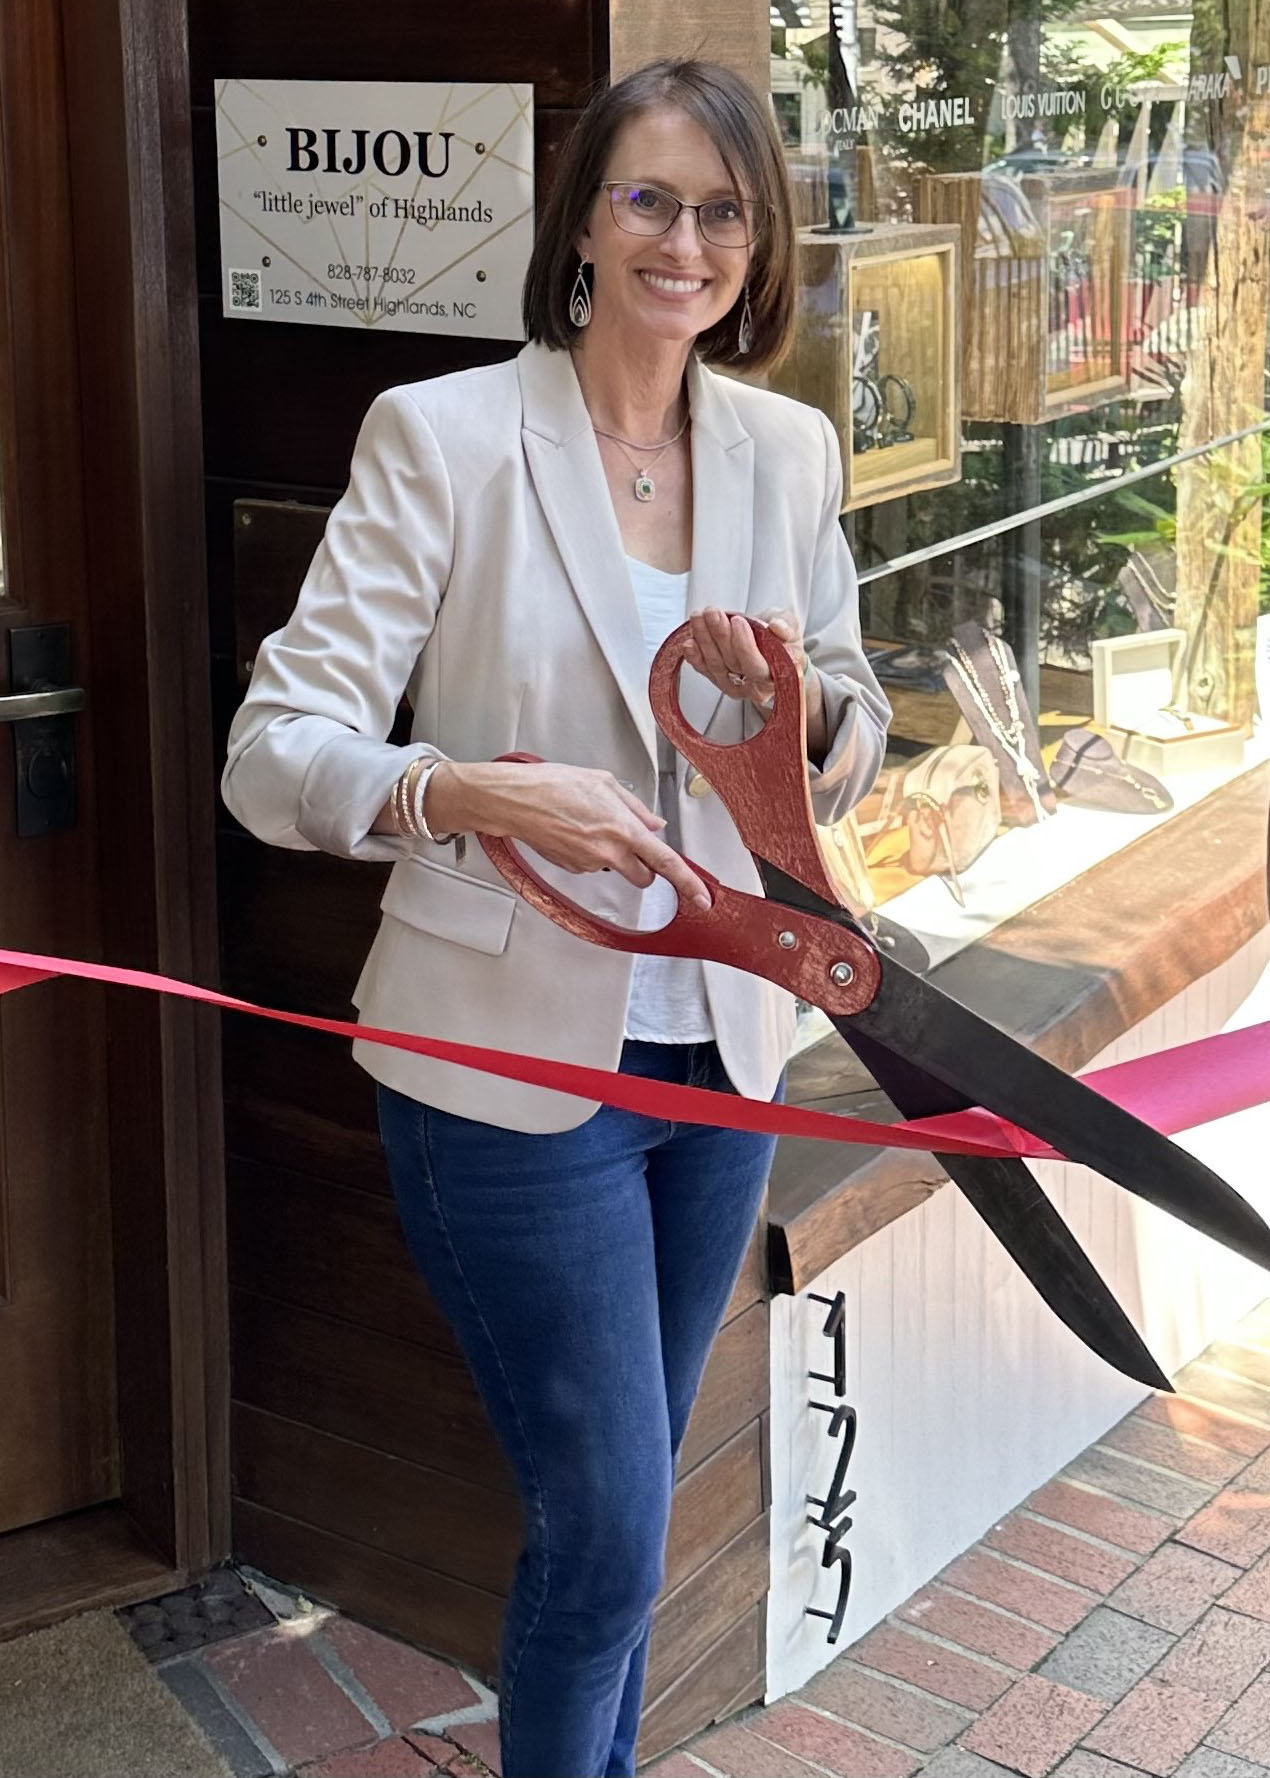 Highlands Chamber of Commerce held a ribbon cutting ceremony for the opening of Bijou “little jewel” of Highlands